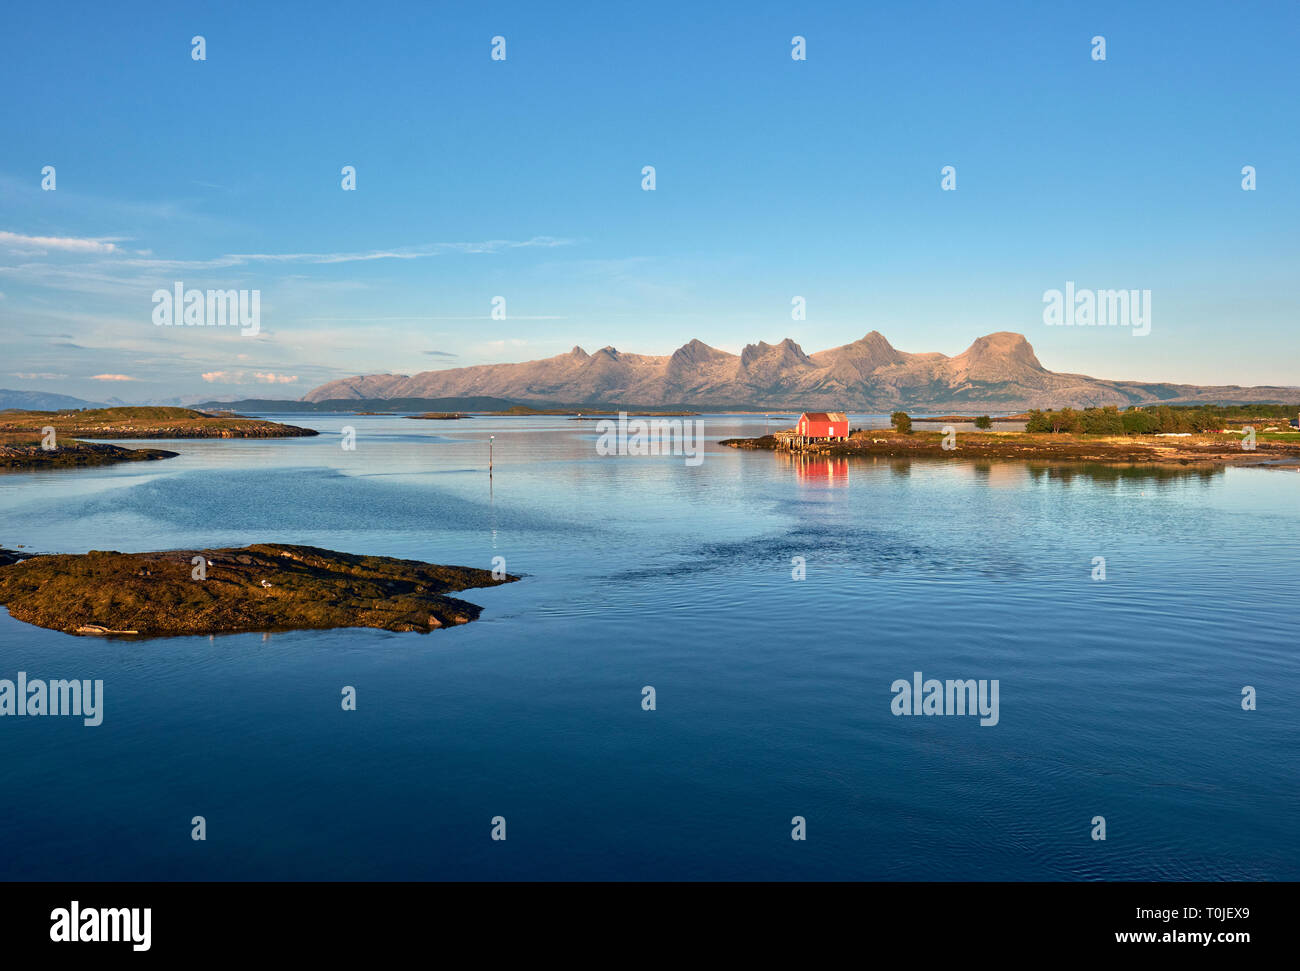 A red rorbuer house and coastline overlooking De syv søstre / The Seven Sisters mountain range on the island of Alsten Alstahaug Nordland, Norway Stock Photo